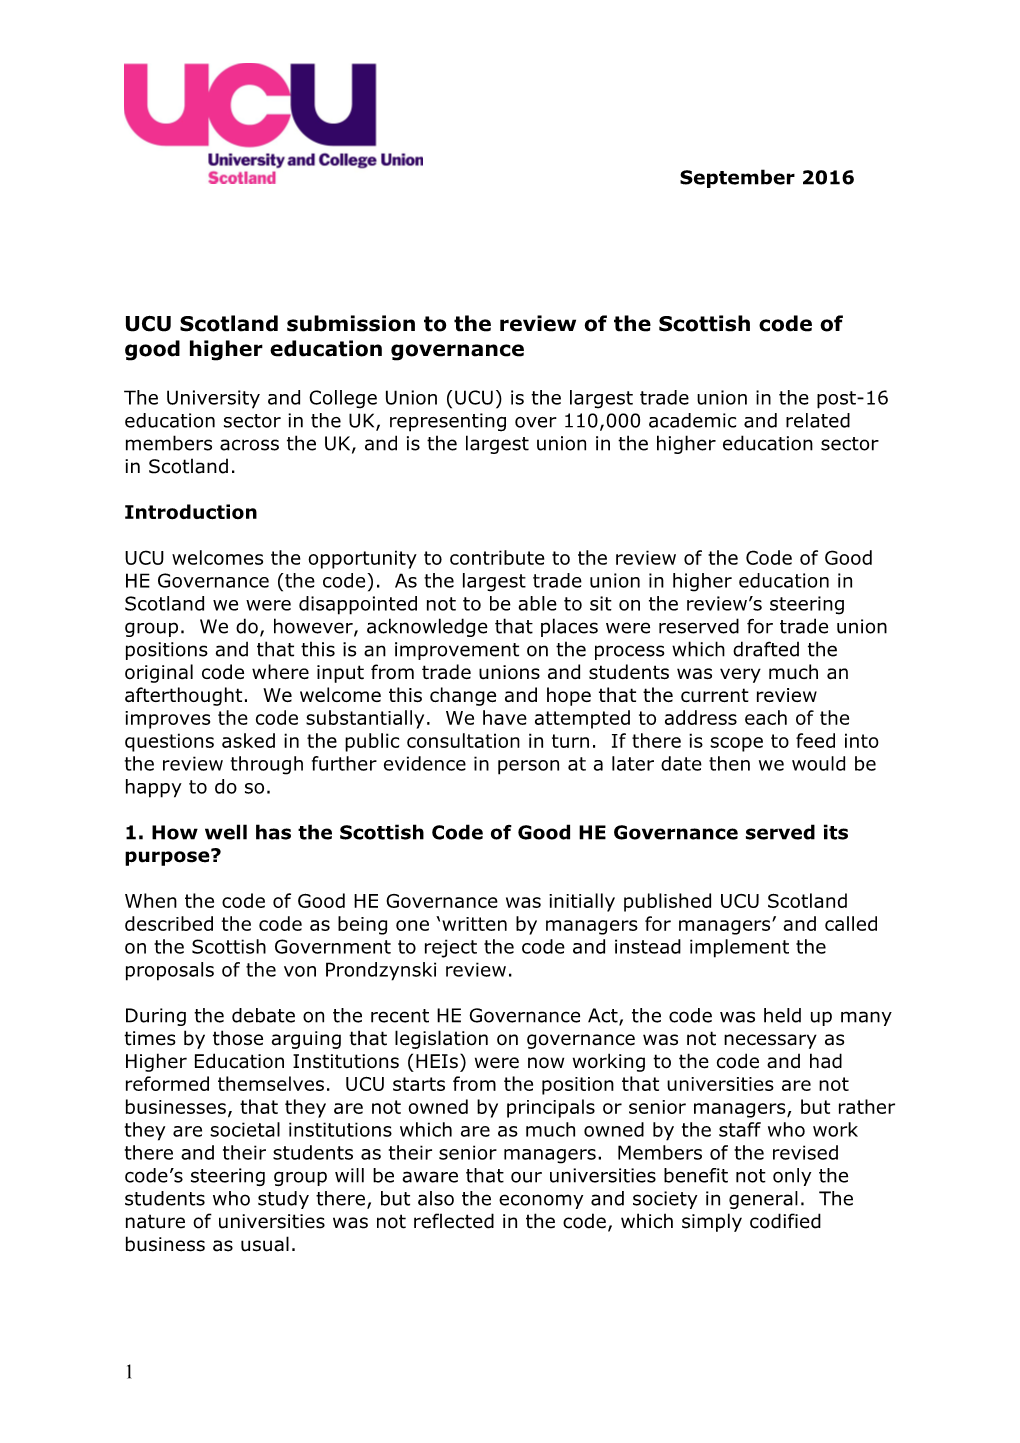 UCU Scotland Submission to the Review of the Scottish Code of Good Higher Education Governance